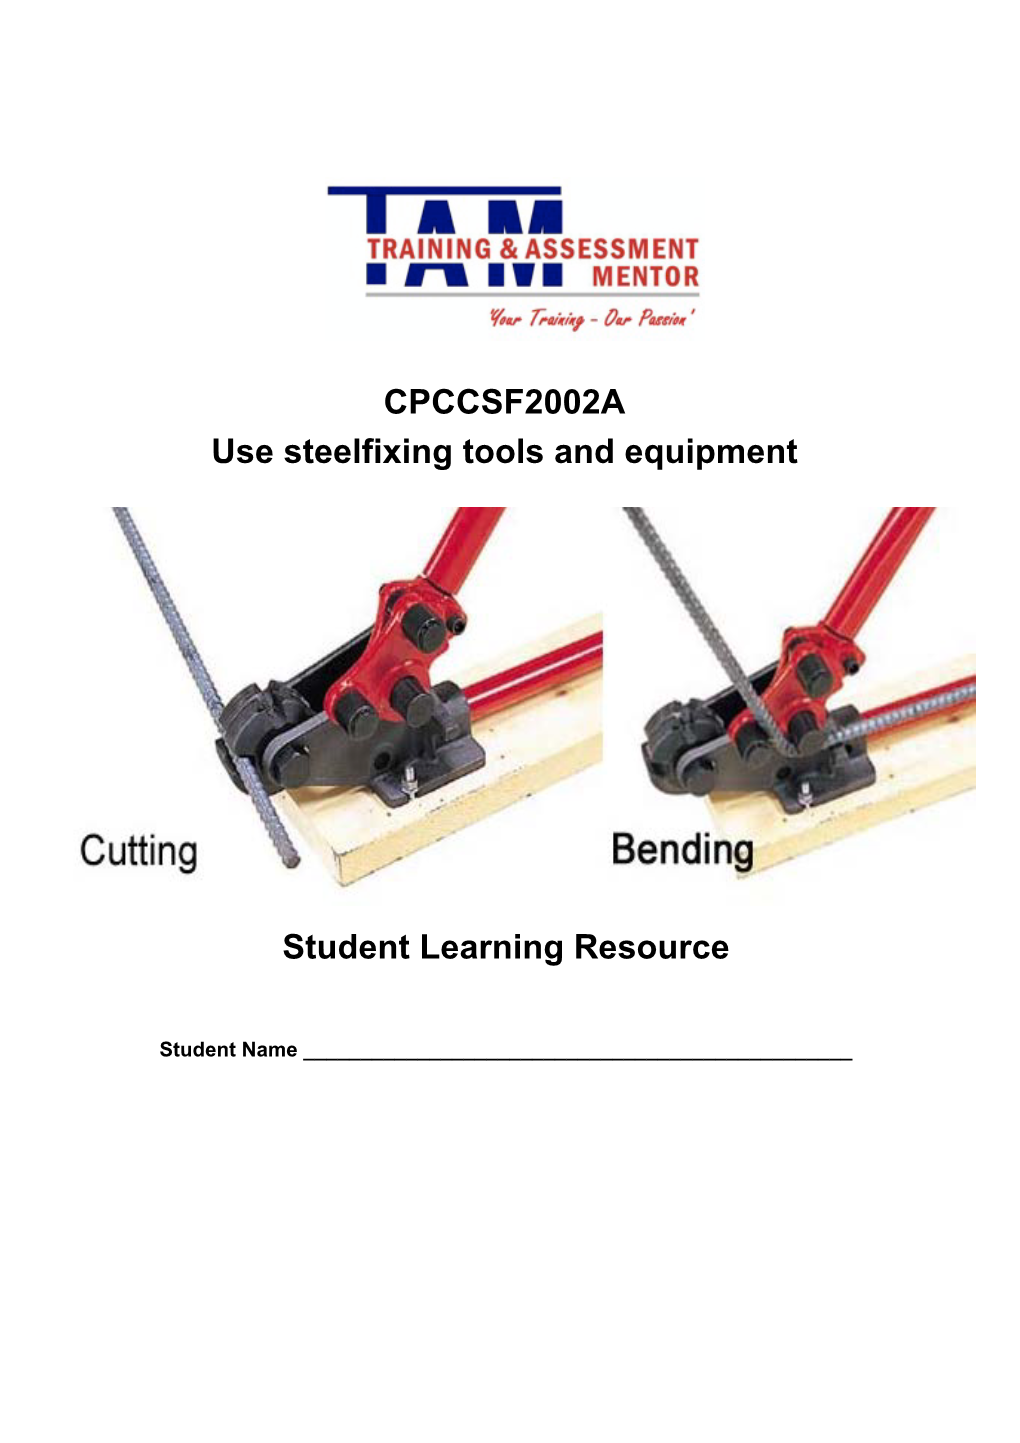 CPCCSF2002A Use Steelfixing Tools and Equipment Student Learning